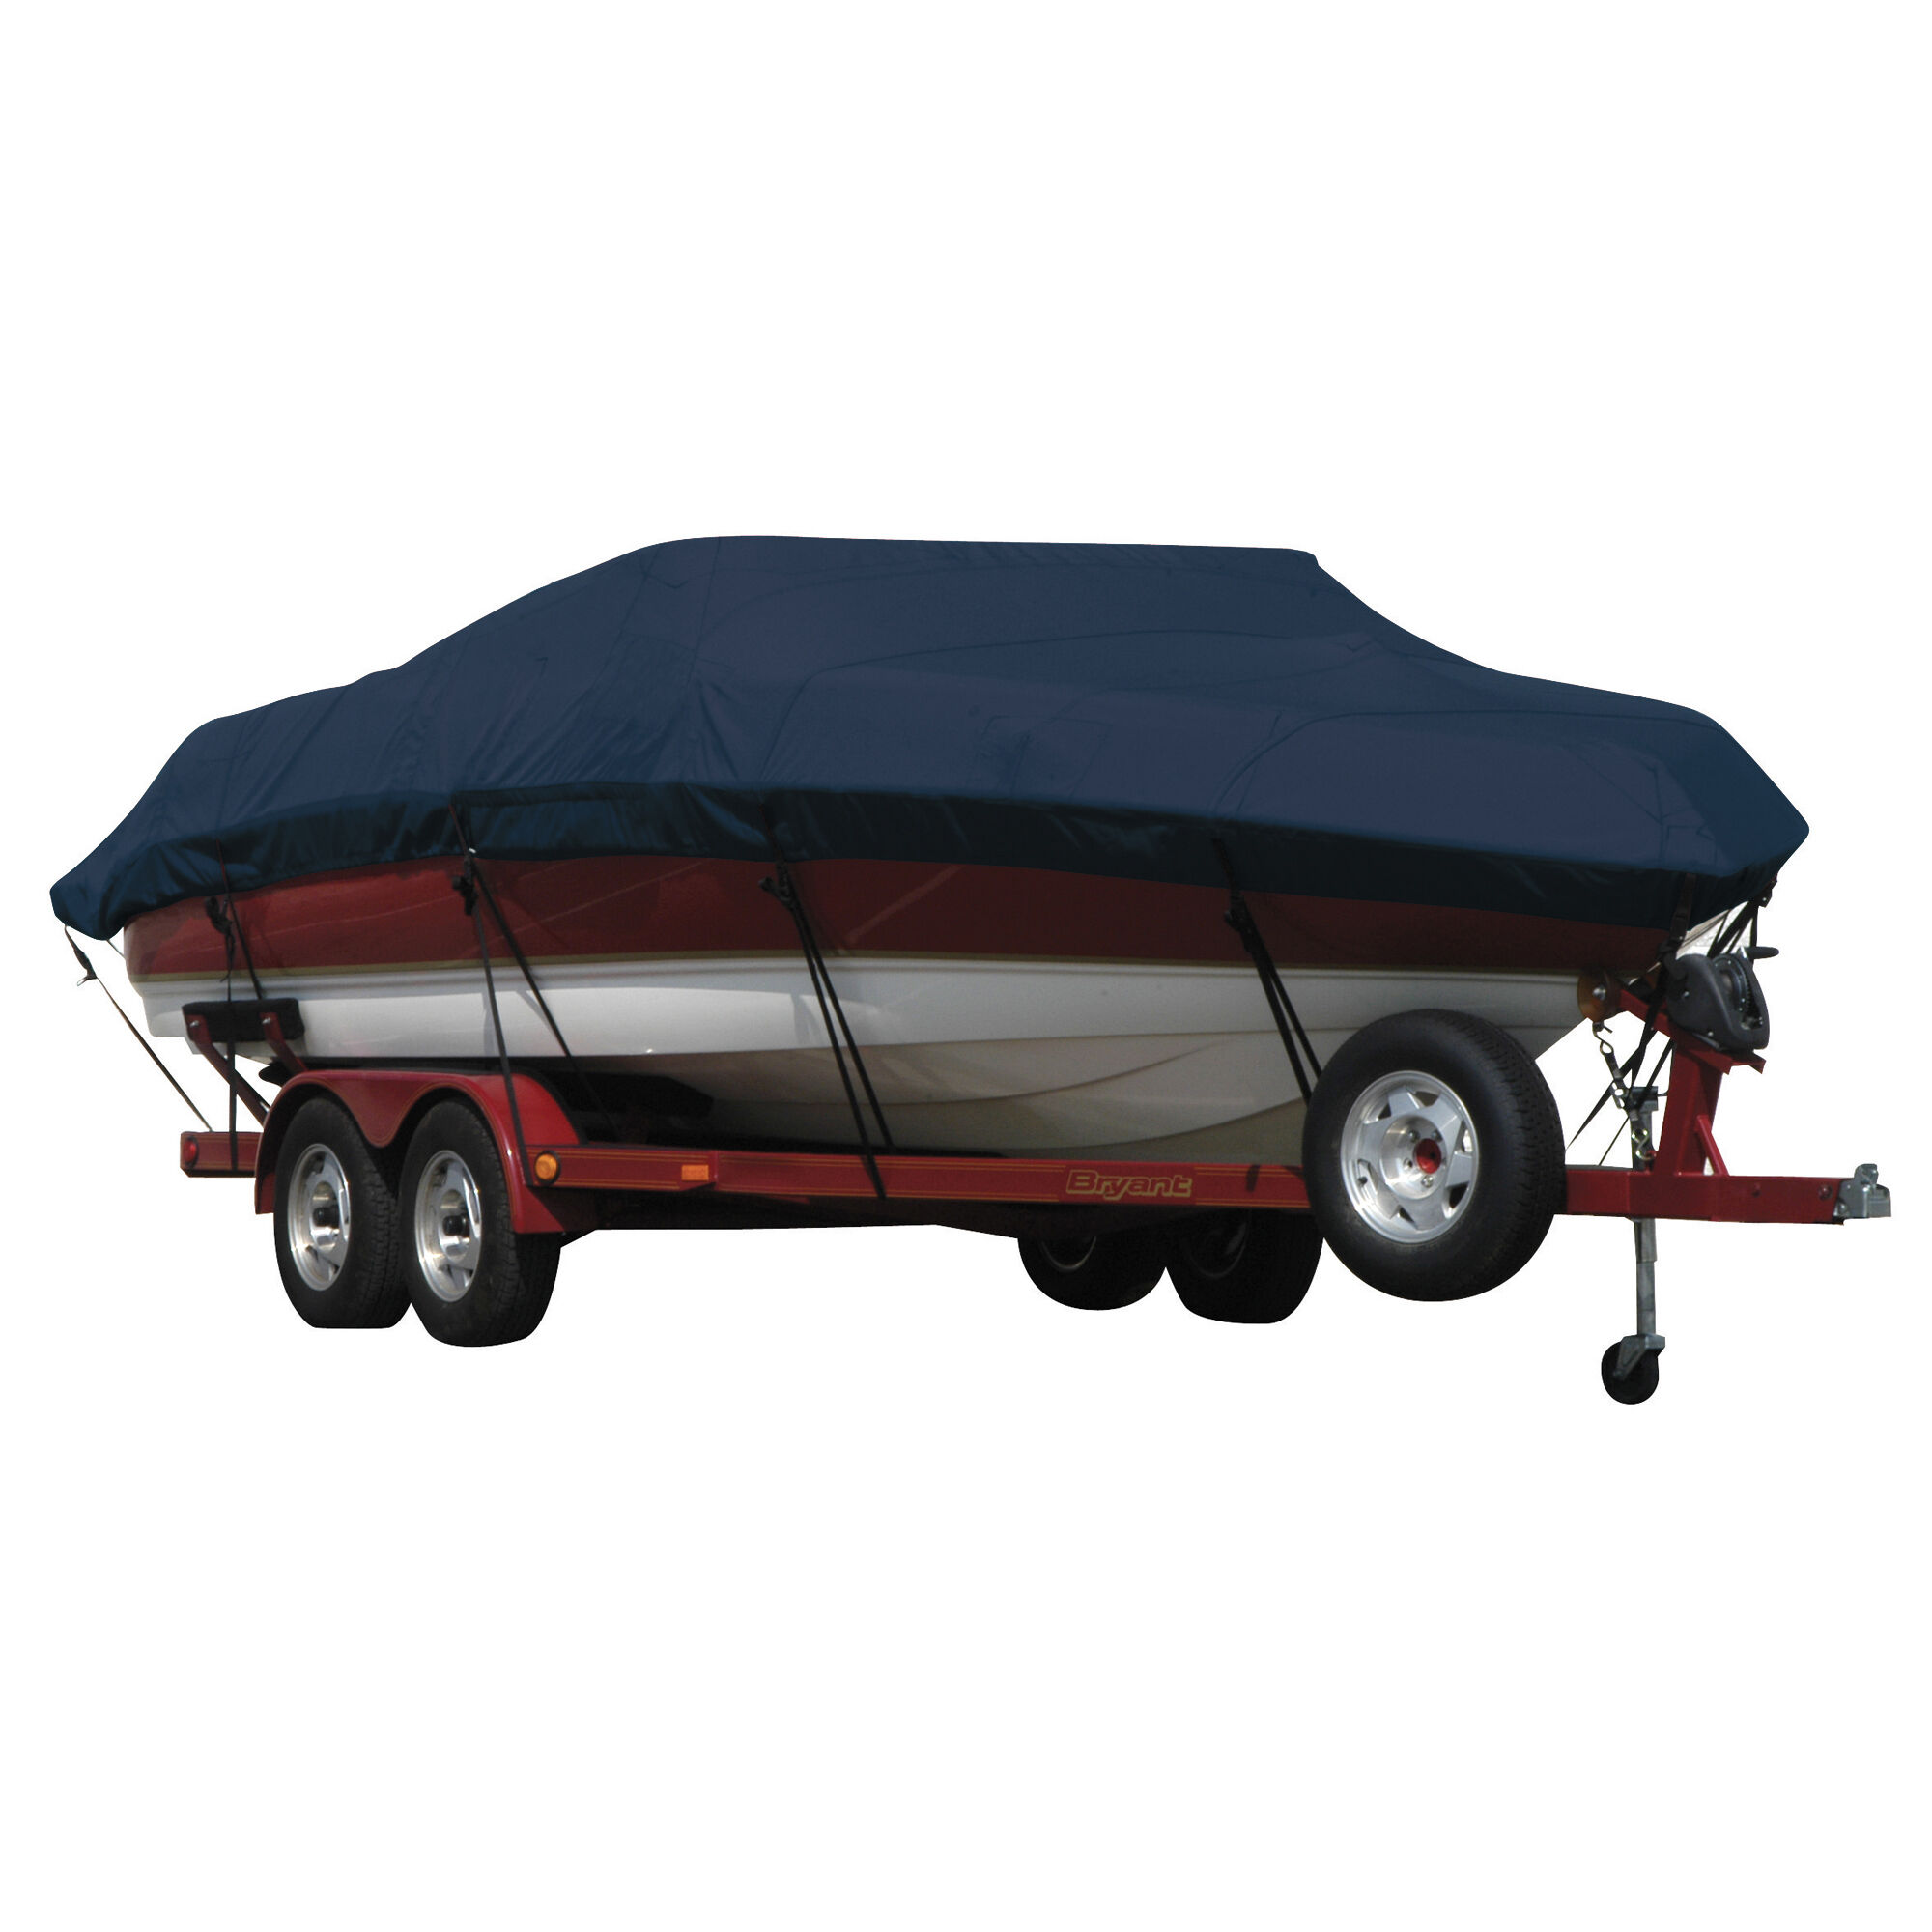 Covermate Exact Fit Sunbrella Boat Cover for Procraft Pro 205 Pro 205 Side Console w/ Shield w/ Port Trolling Motor O/B. Navy in Navy Blue